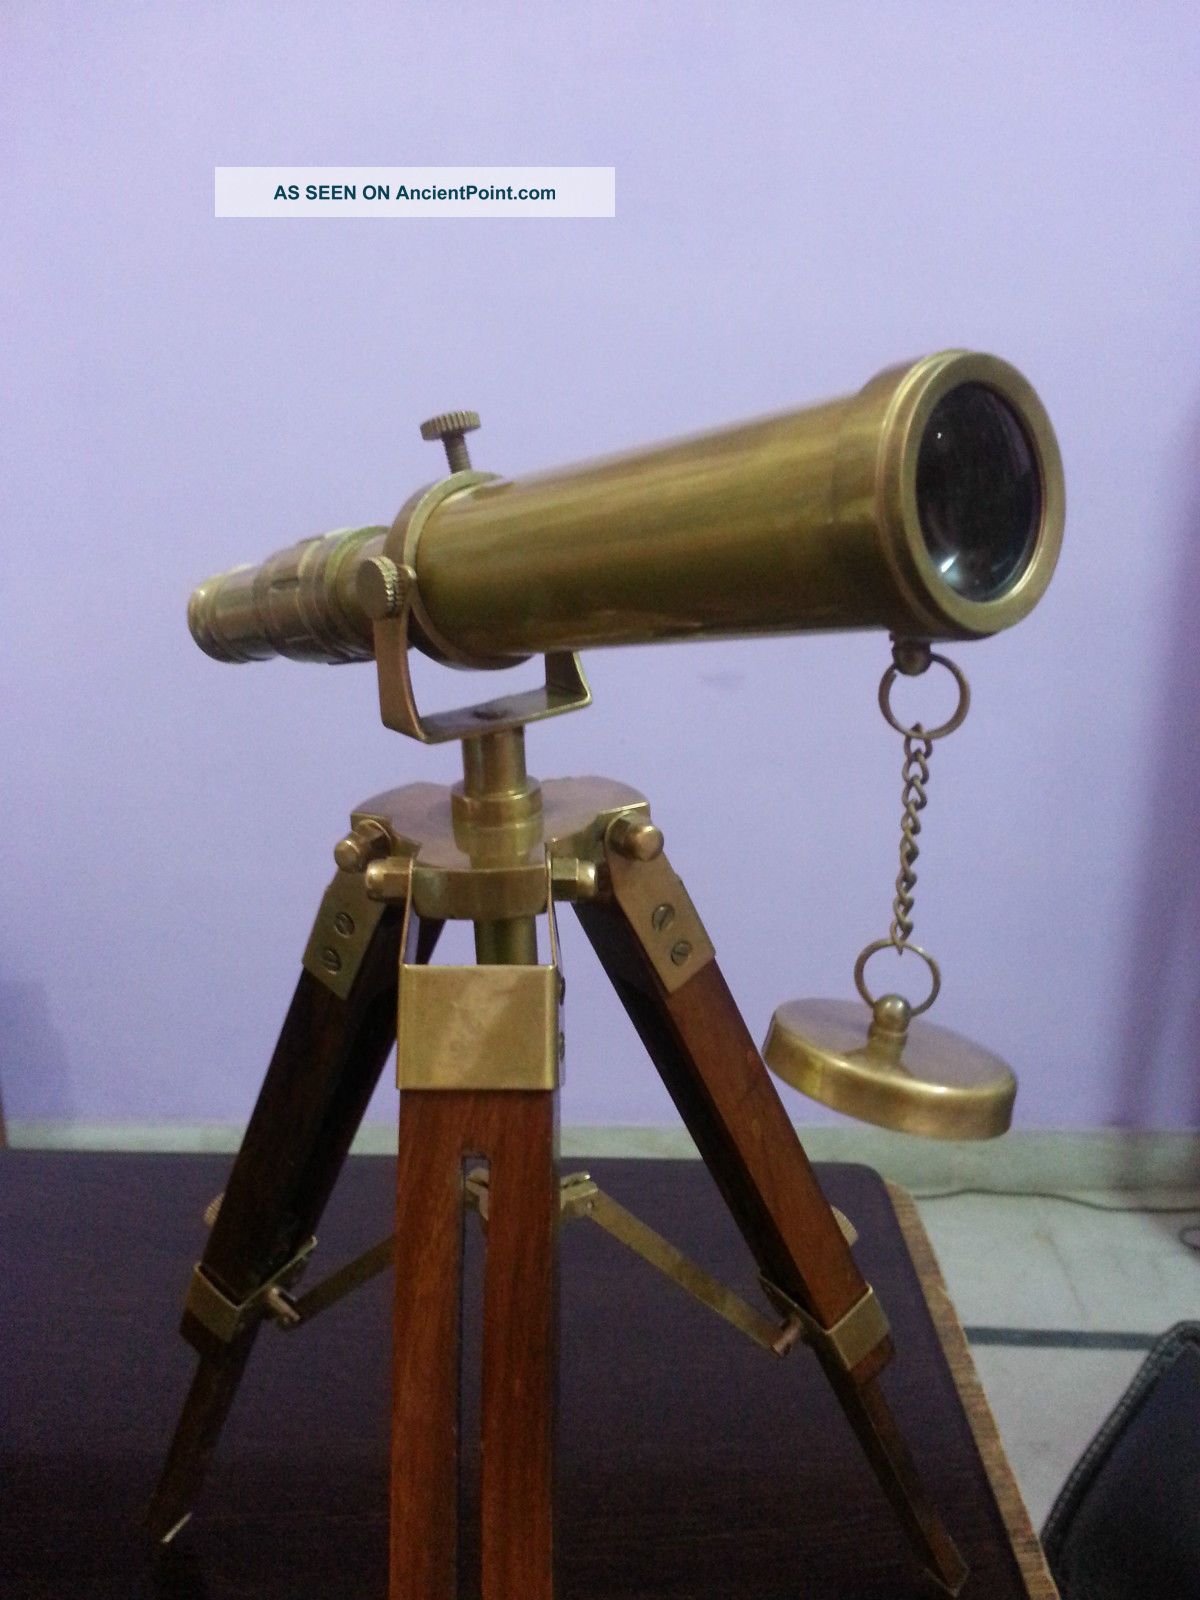 Nautical Brass Telescope With Wooden Tripod Stand Collectible Antique Desk Decor